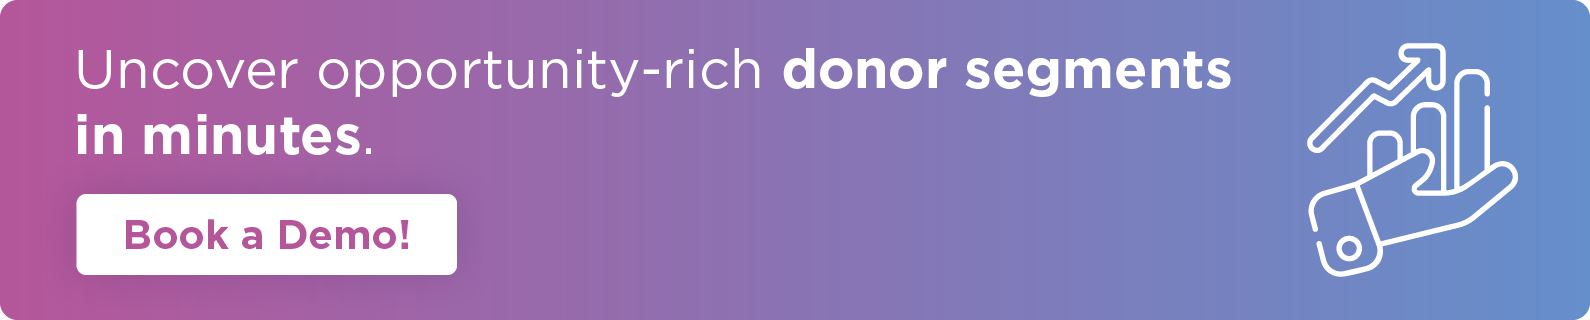 To learn more about leveraging technology during the donor segmentation process, contact GivingDNA.